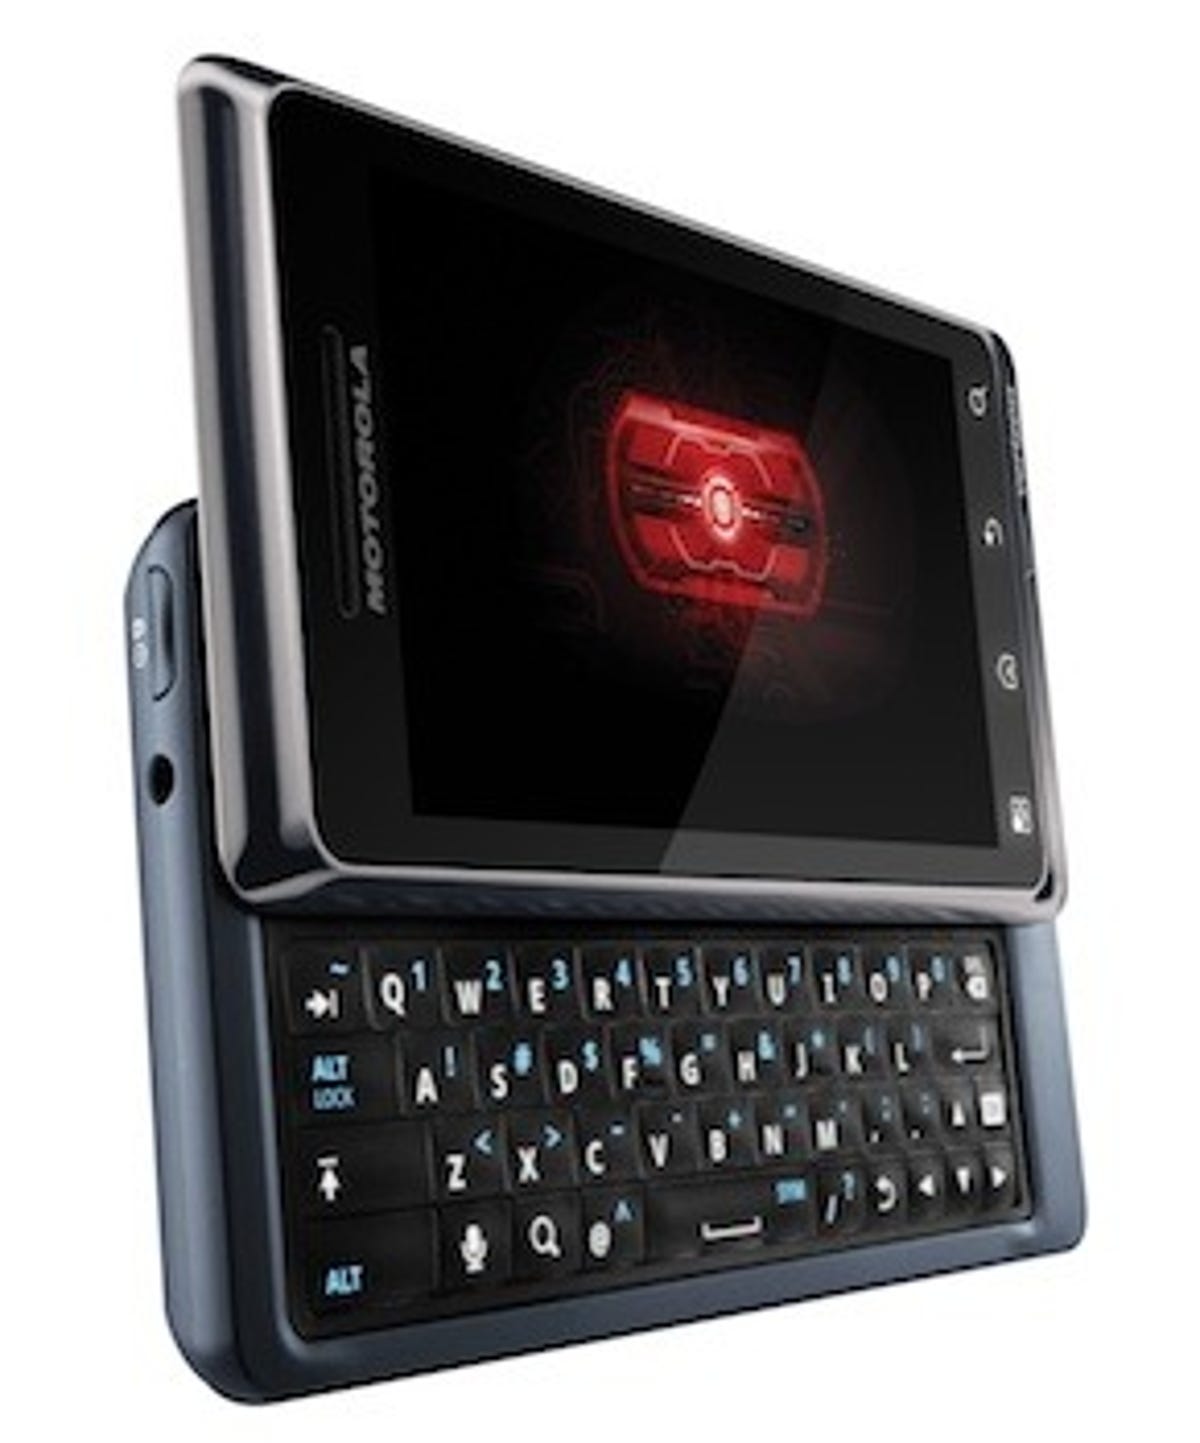 Motorola's Droid 2 packs  Texas Instruments' silicon that's the spitting image of the Droid X.